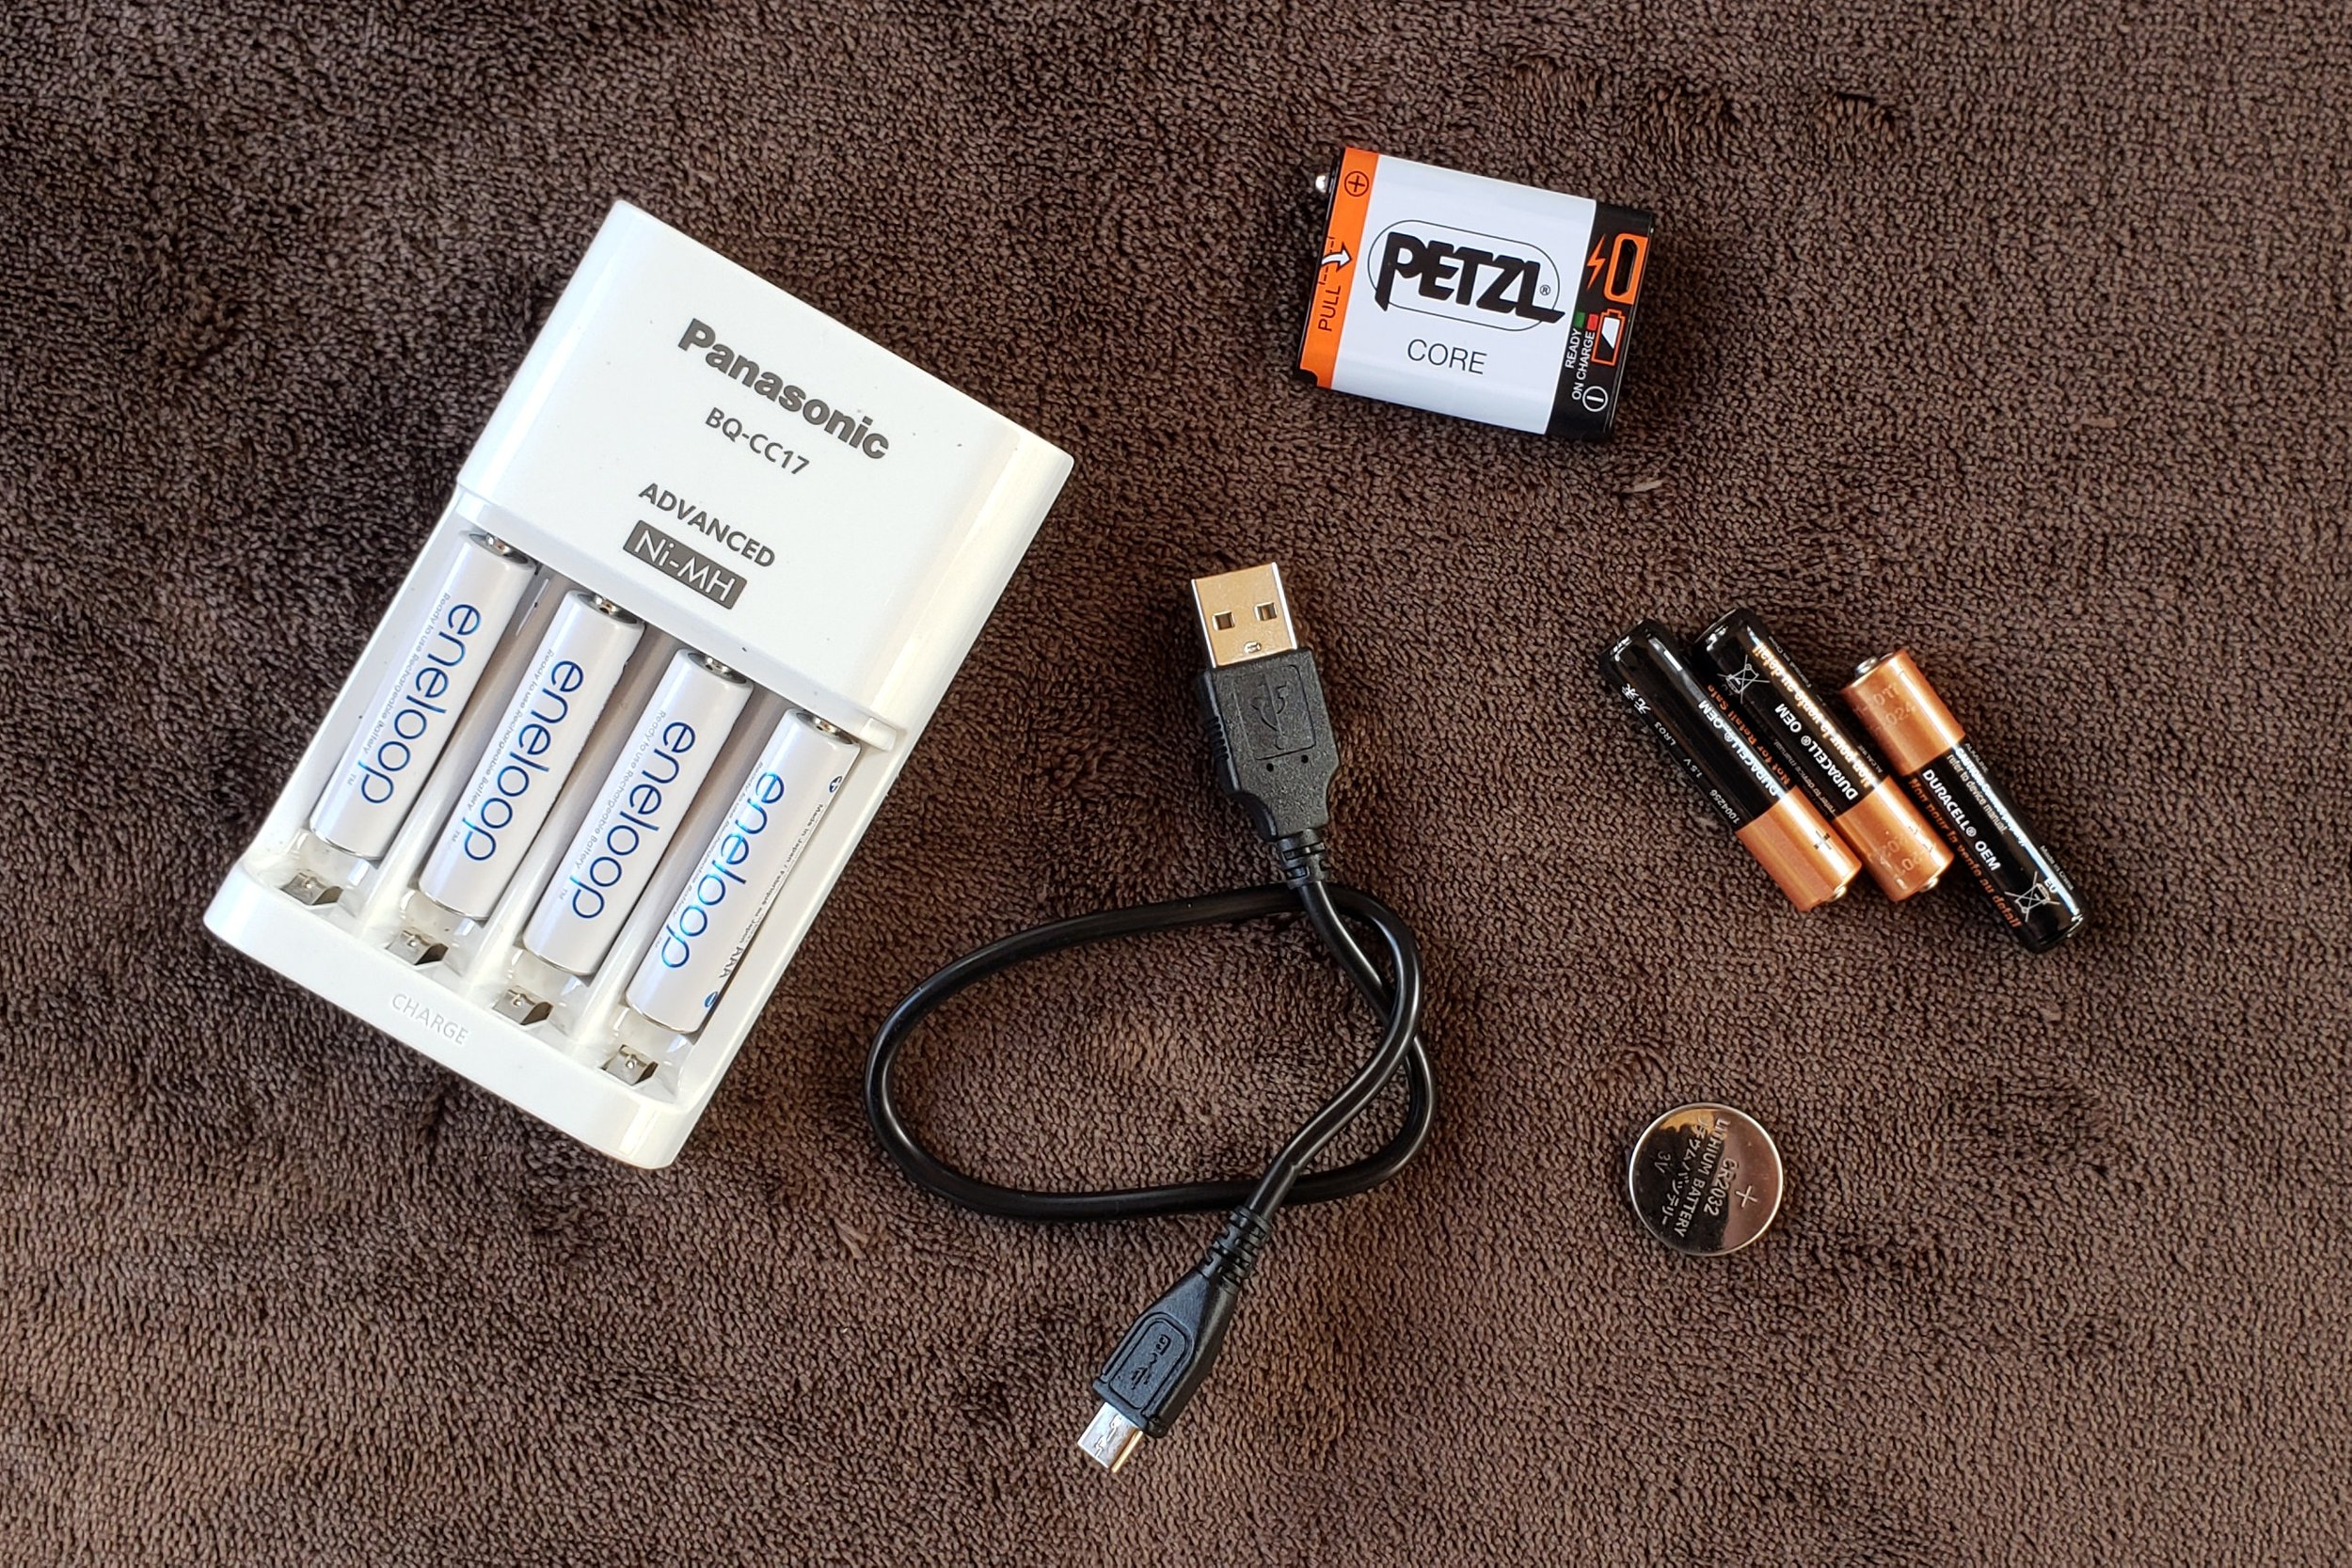 Rechargeable batteries, standard triple a batteries, and the Petzl Core battery